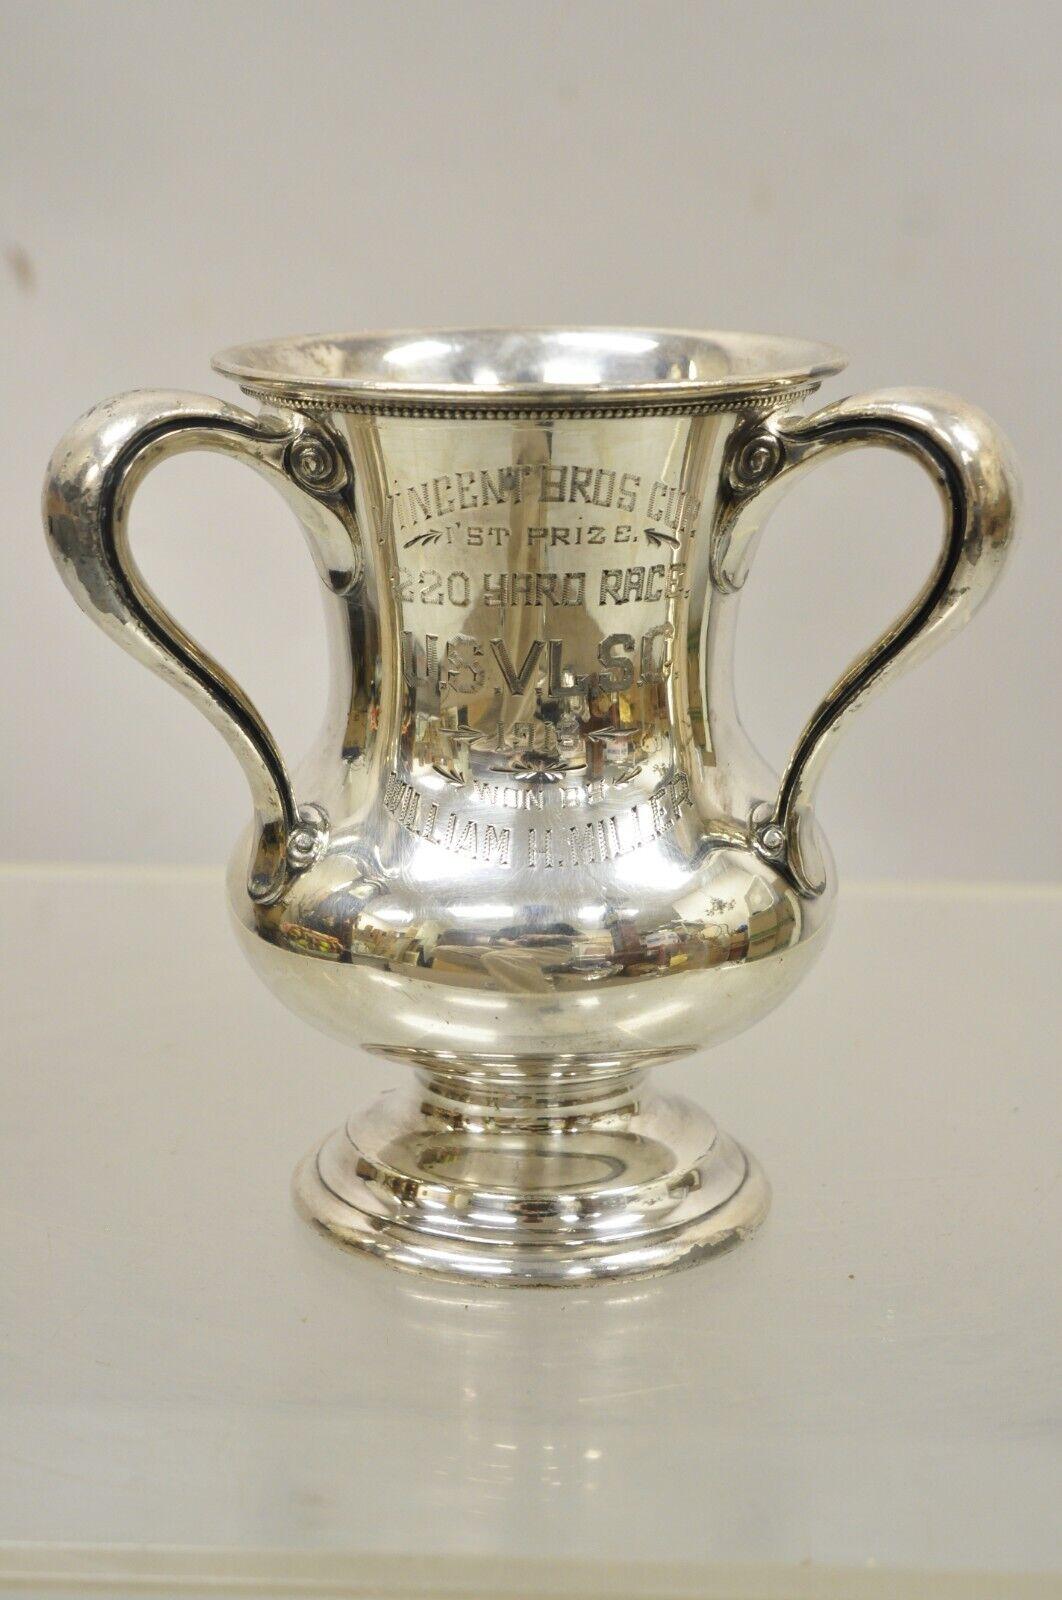 Wallace Brothers Silver Plated Three Handle Trophy Loving Cup Award 1st Prize For Sale 5